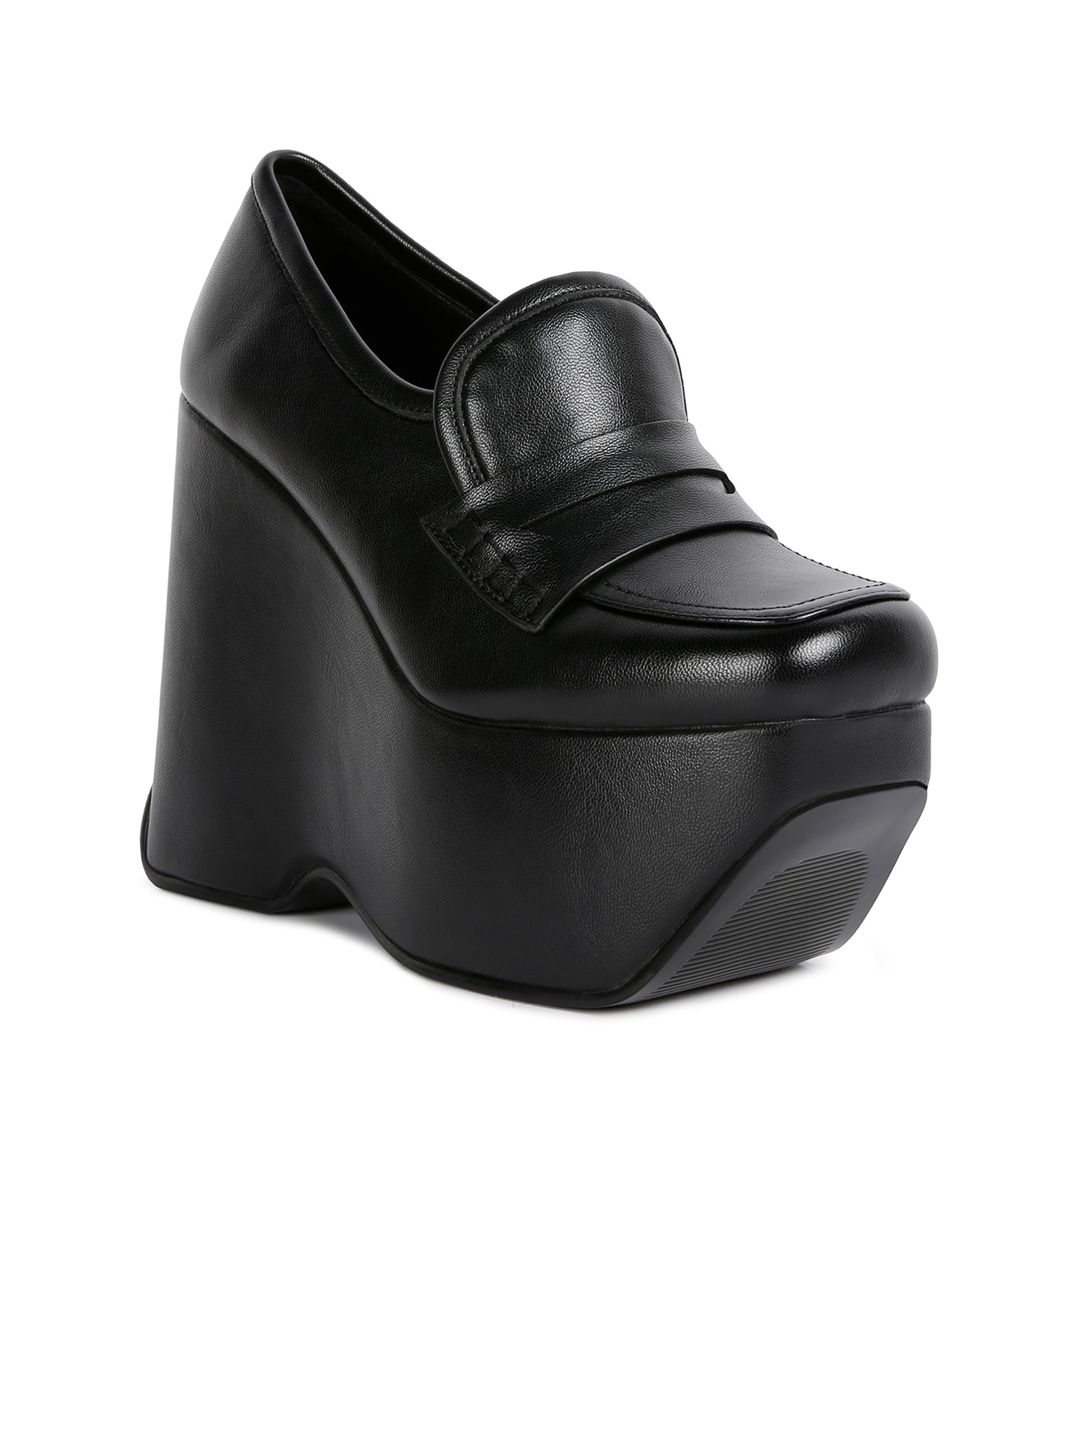 RAG & CO Women High Platform Wedge Loafers Price in India